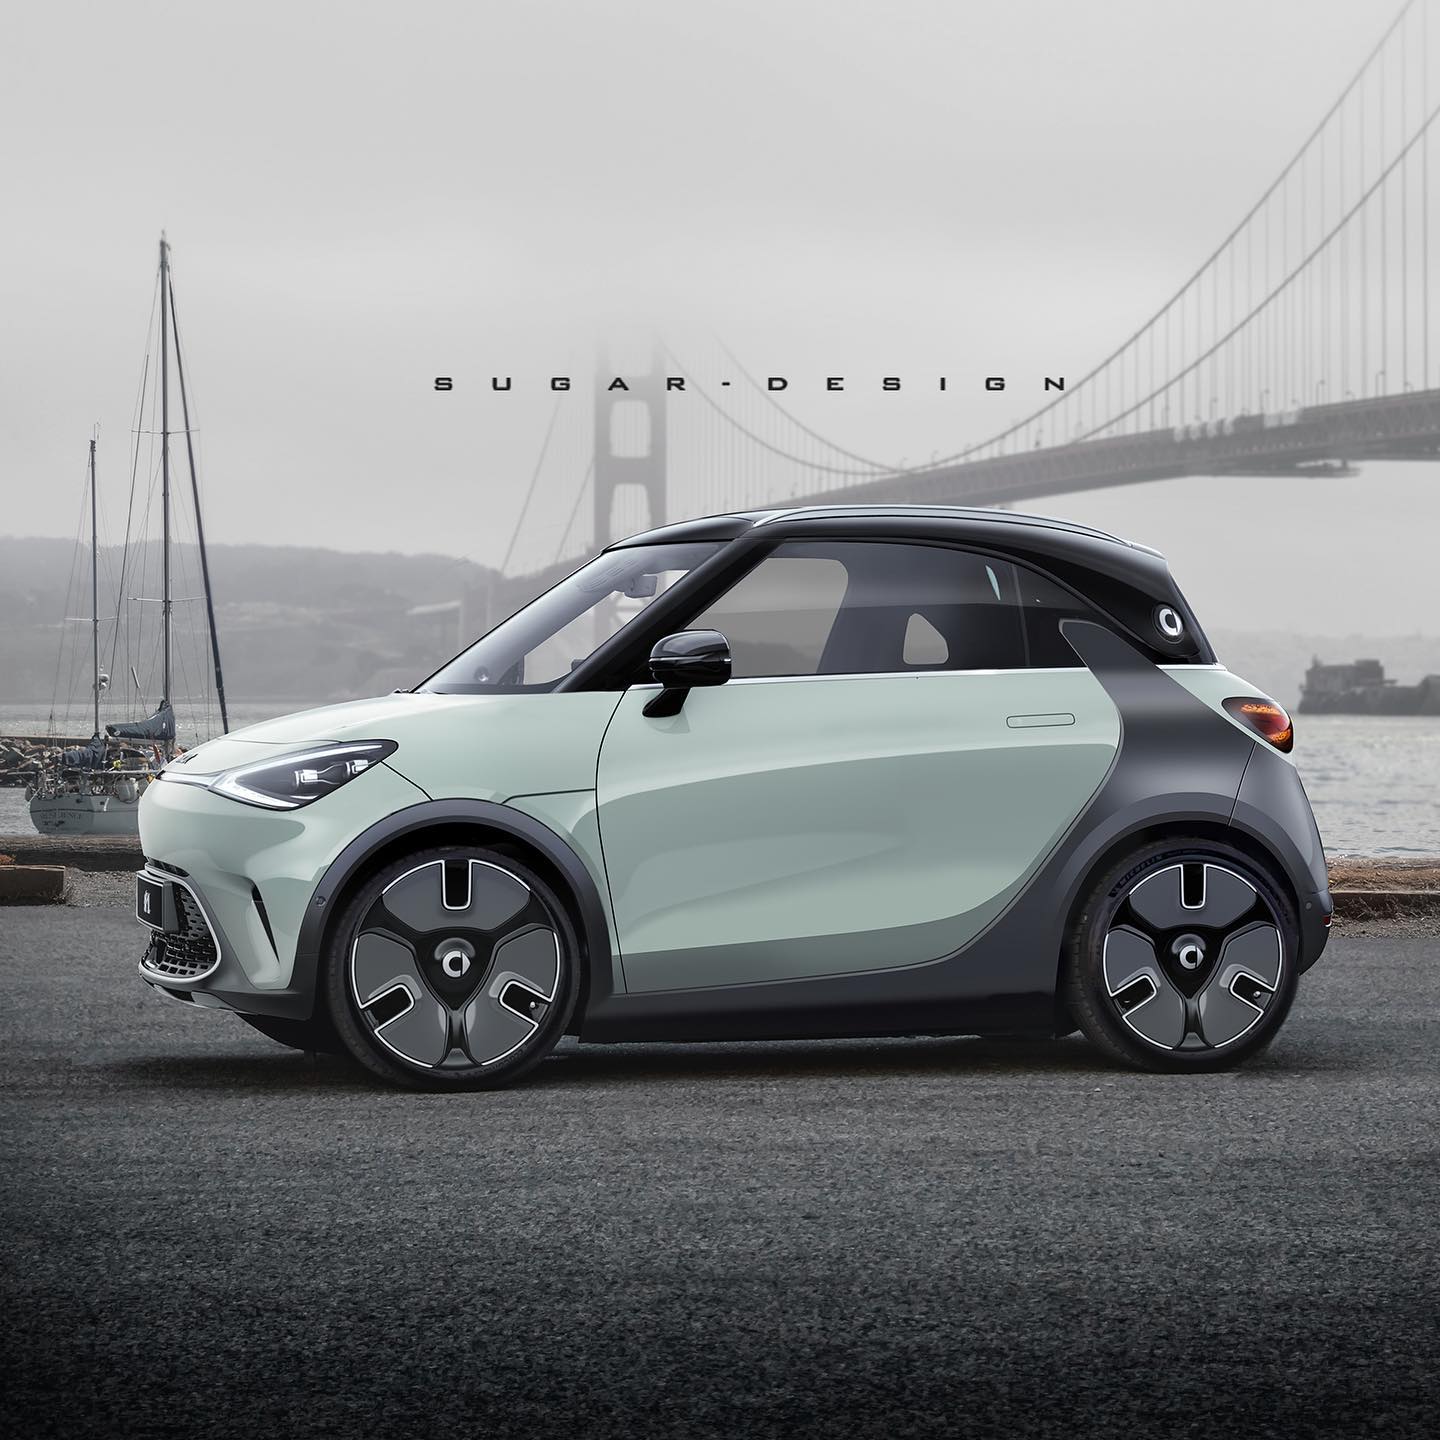 https://s1.cdn.autoevolution.com/images/news/gallery/smart-1-digitally-turns-into-a-cute-fortwo-successor-or-is-it-the-smart-05_1.jpg